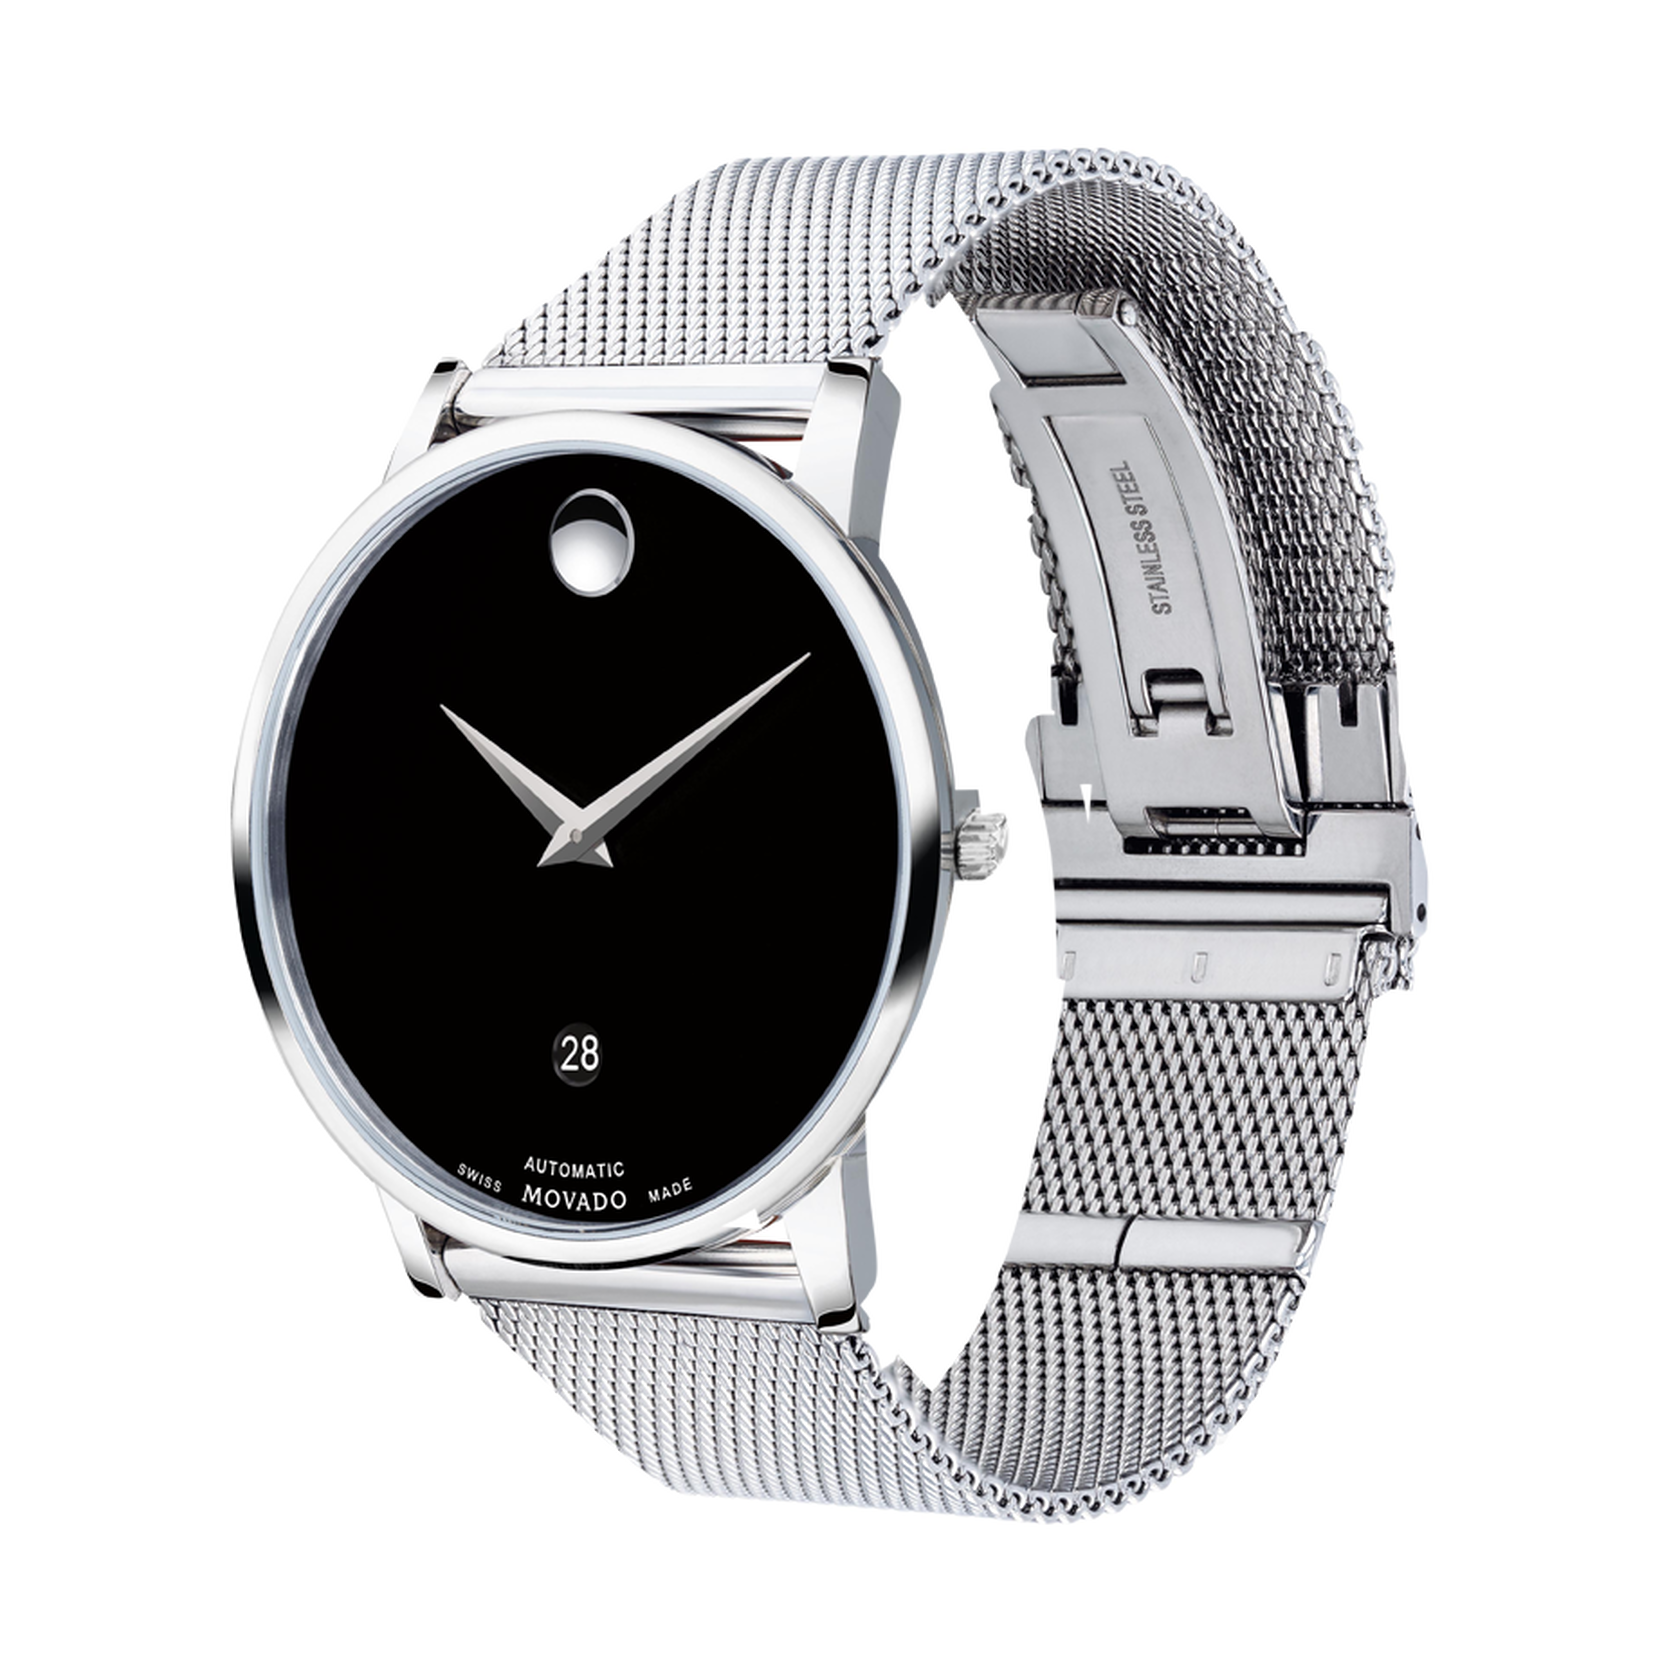 Movado| Museum Classic Automatic and steel mesh caseback dial movement structure black bracelet to stainless with display watch exposed and